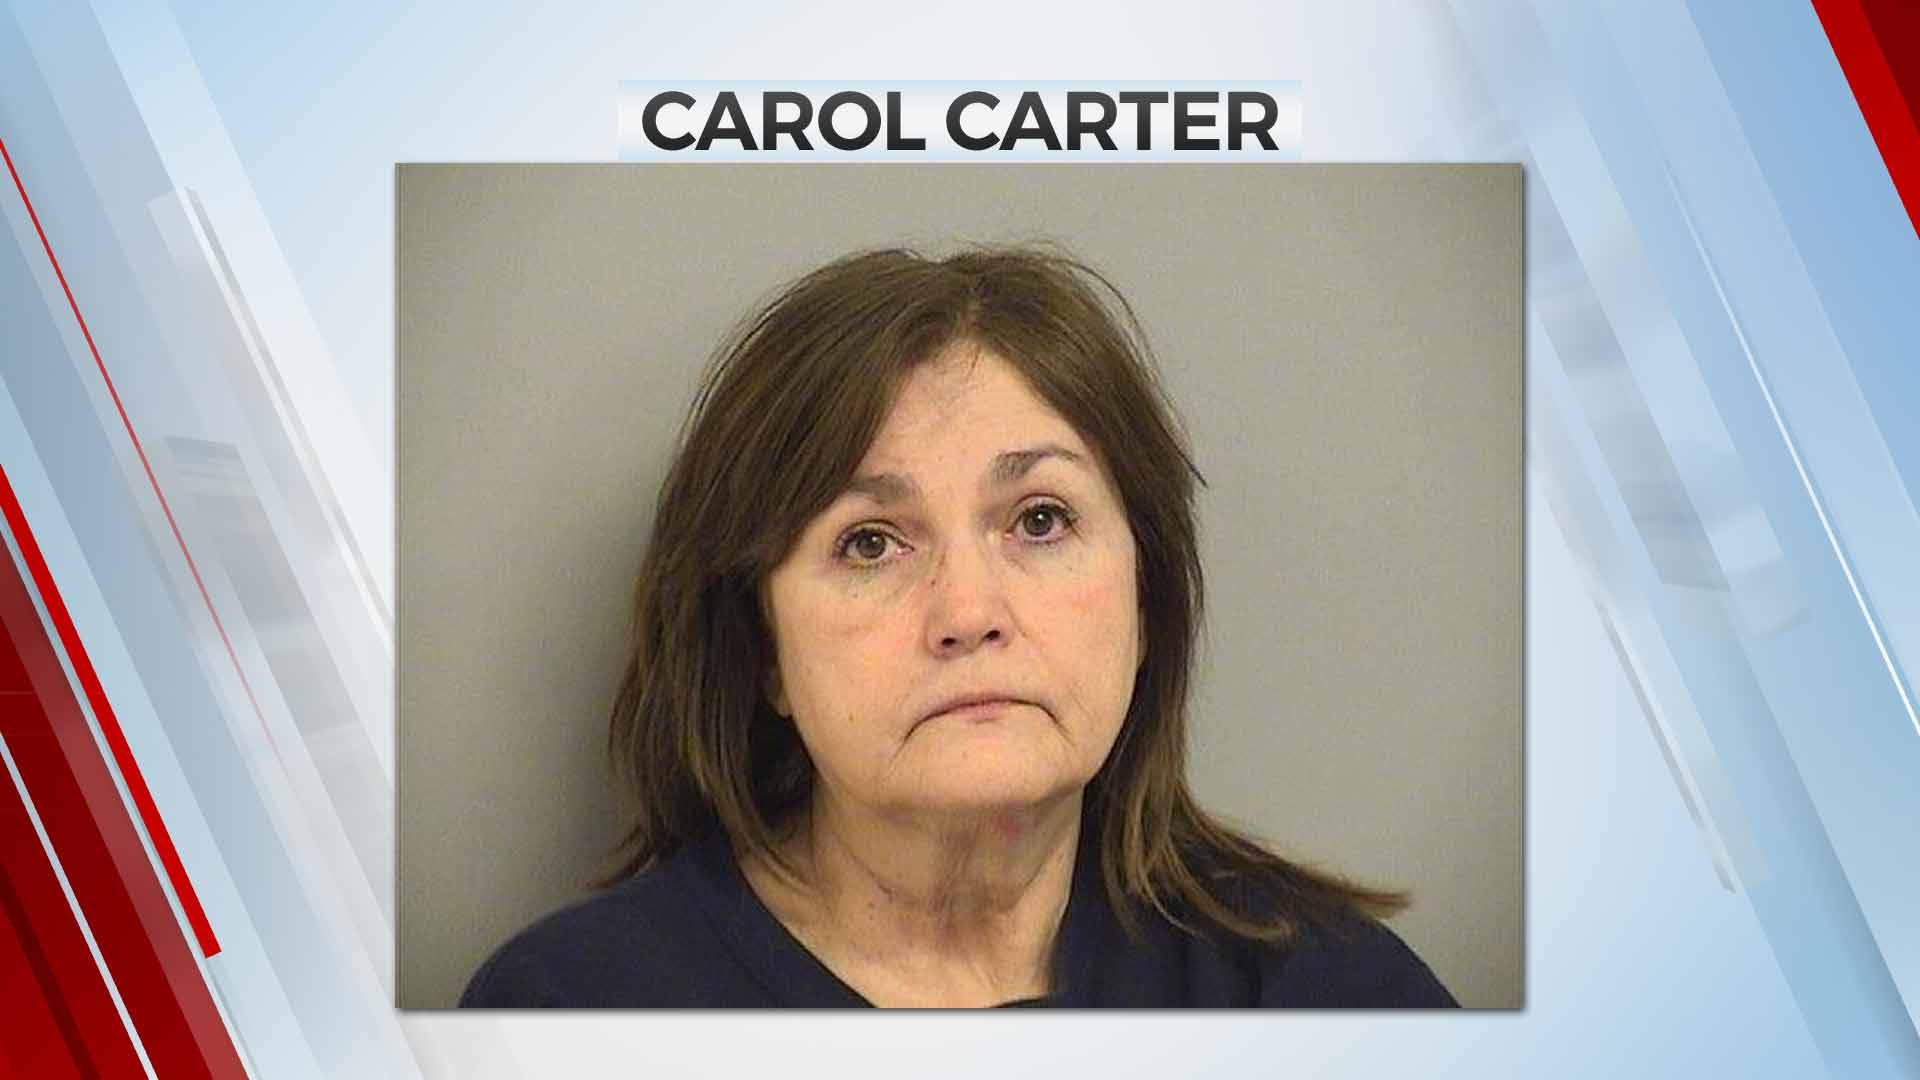 Collinsville Woman Suspected Of DUI In 3rd Alcohol-Related Arrest